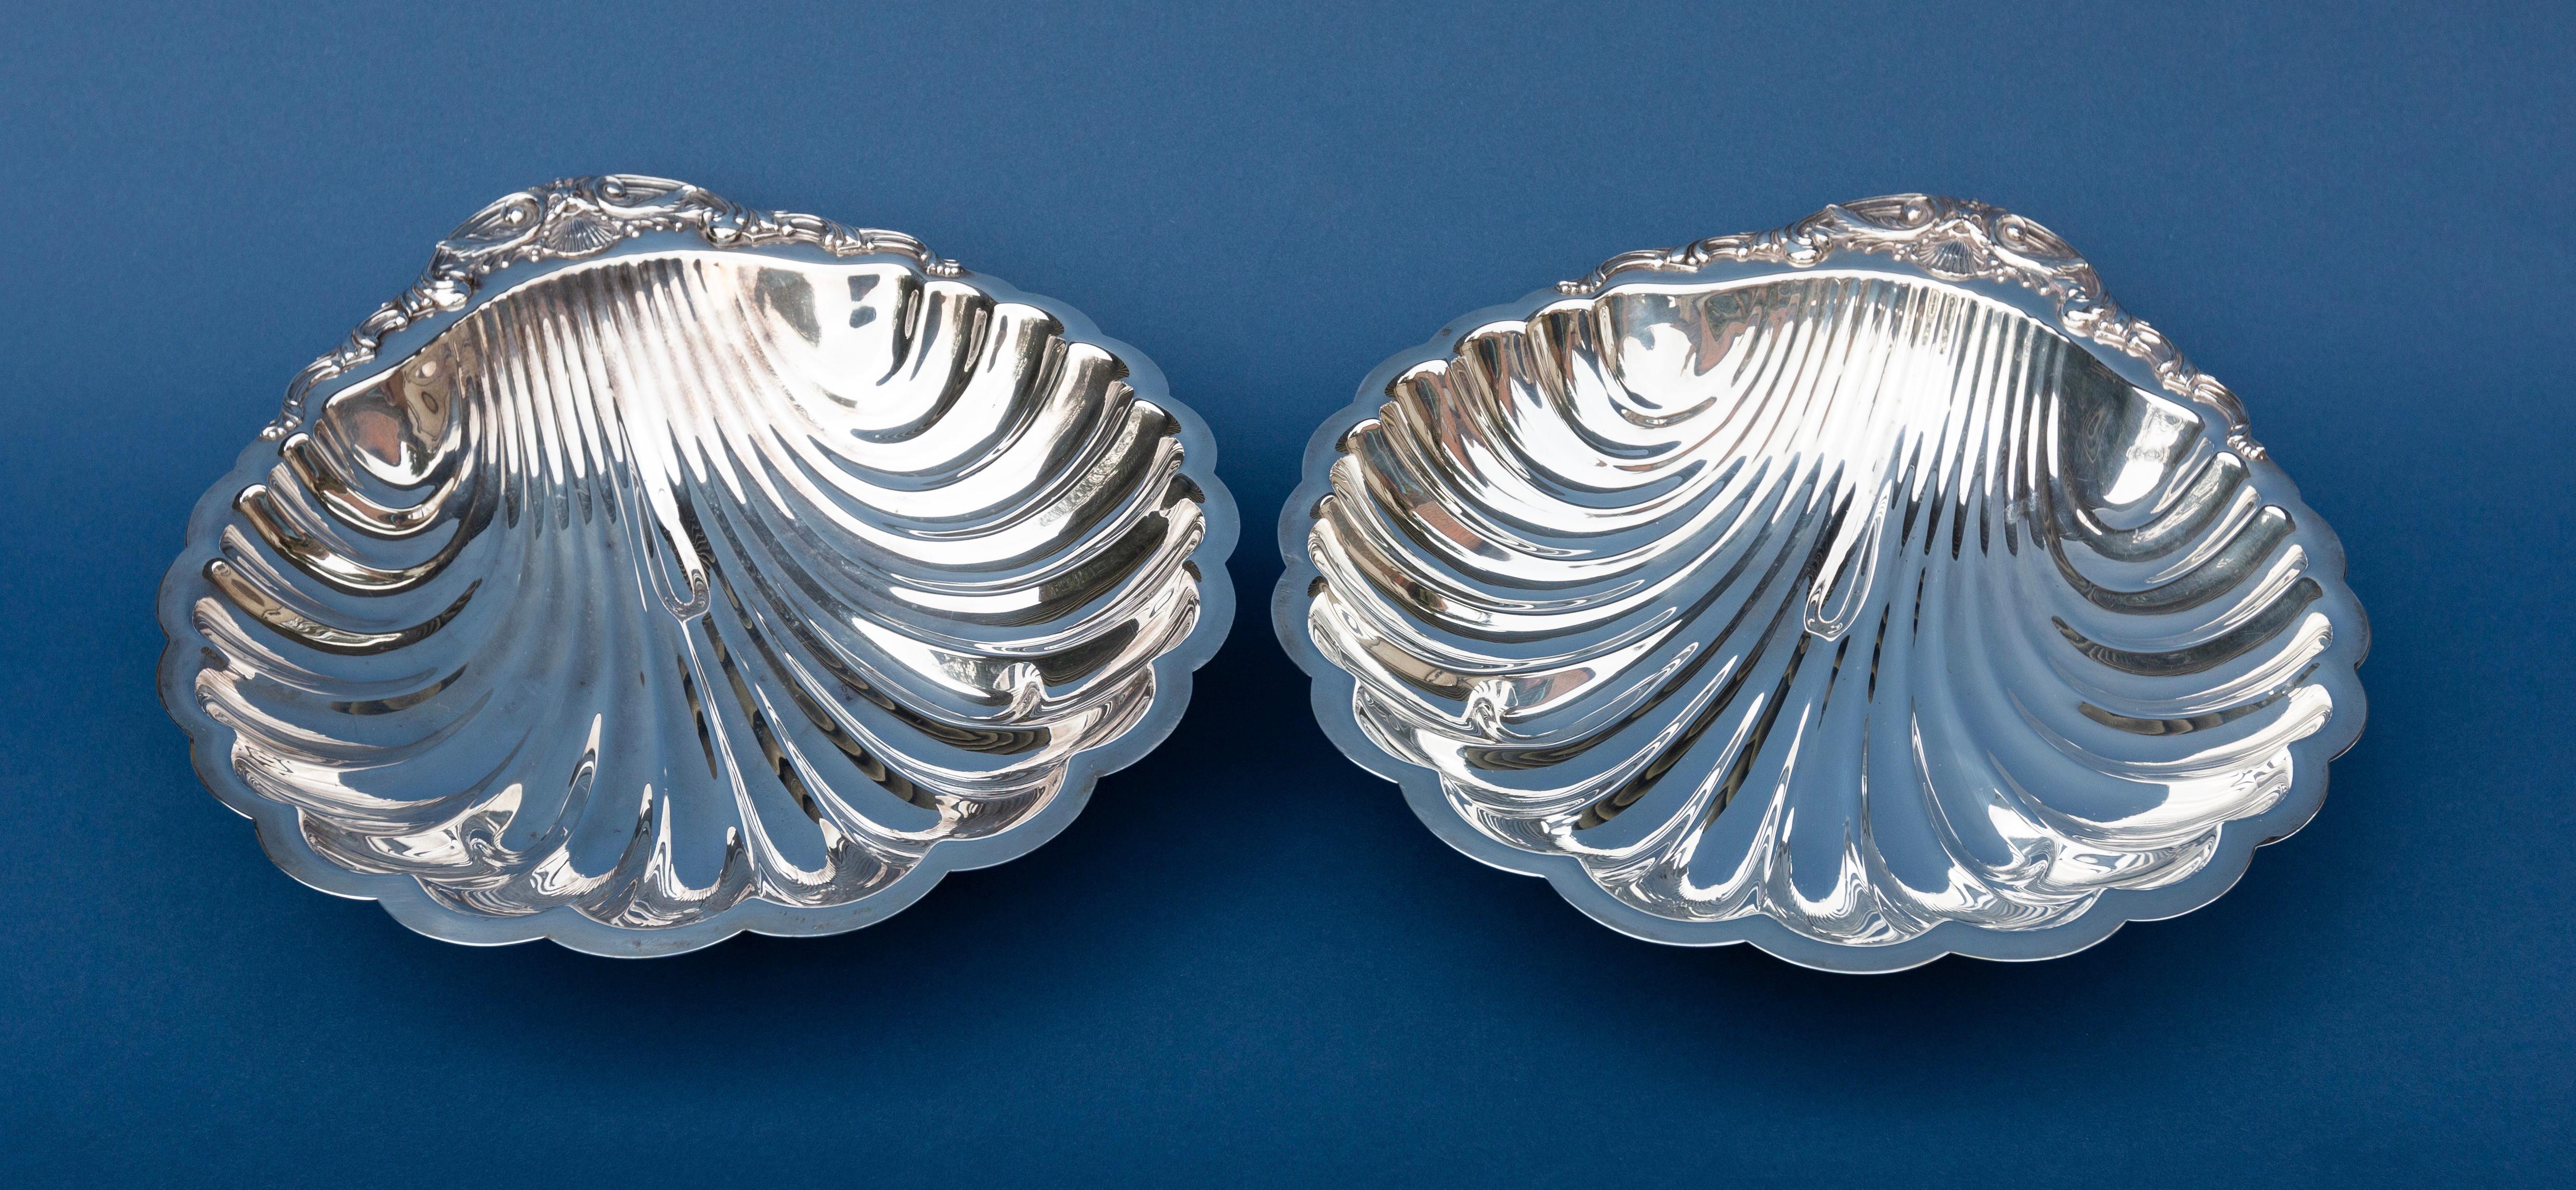 Pair of American large silver plated shell-shaped serving dishes, by the F.B. Rogers Silver Company.